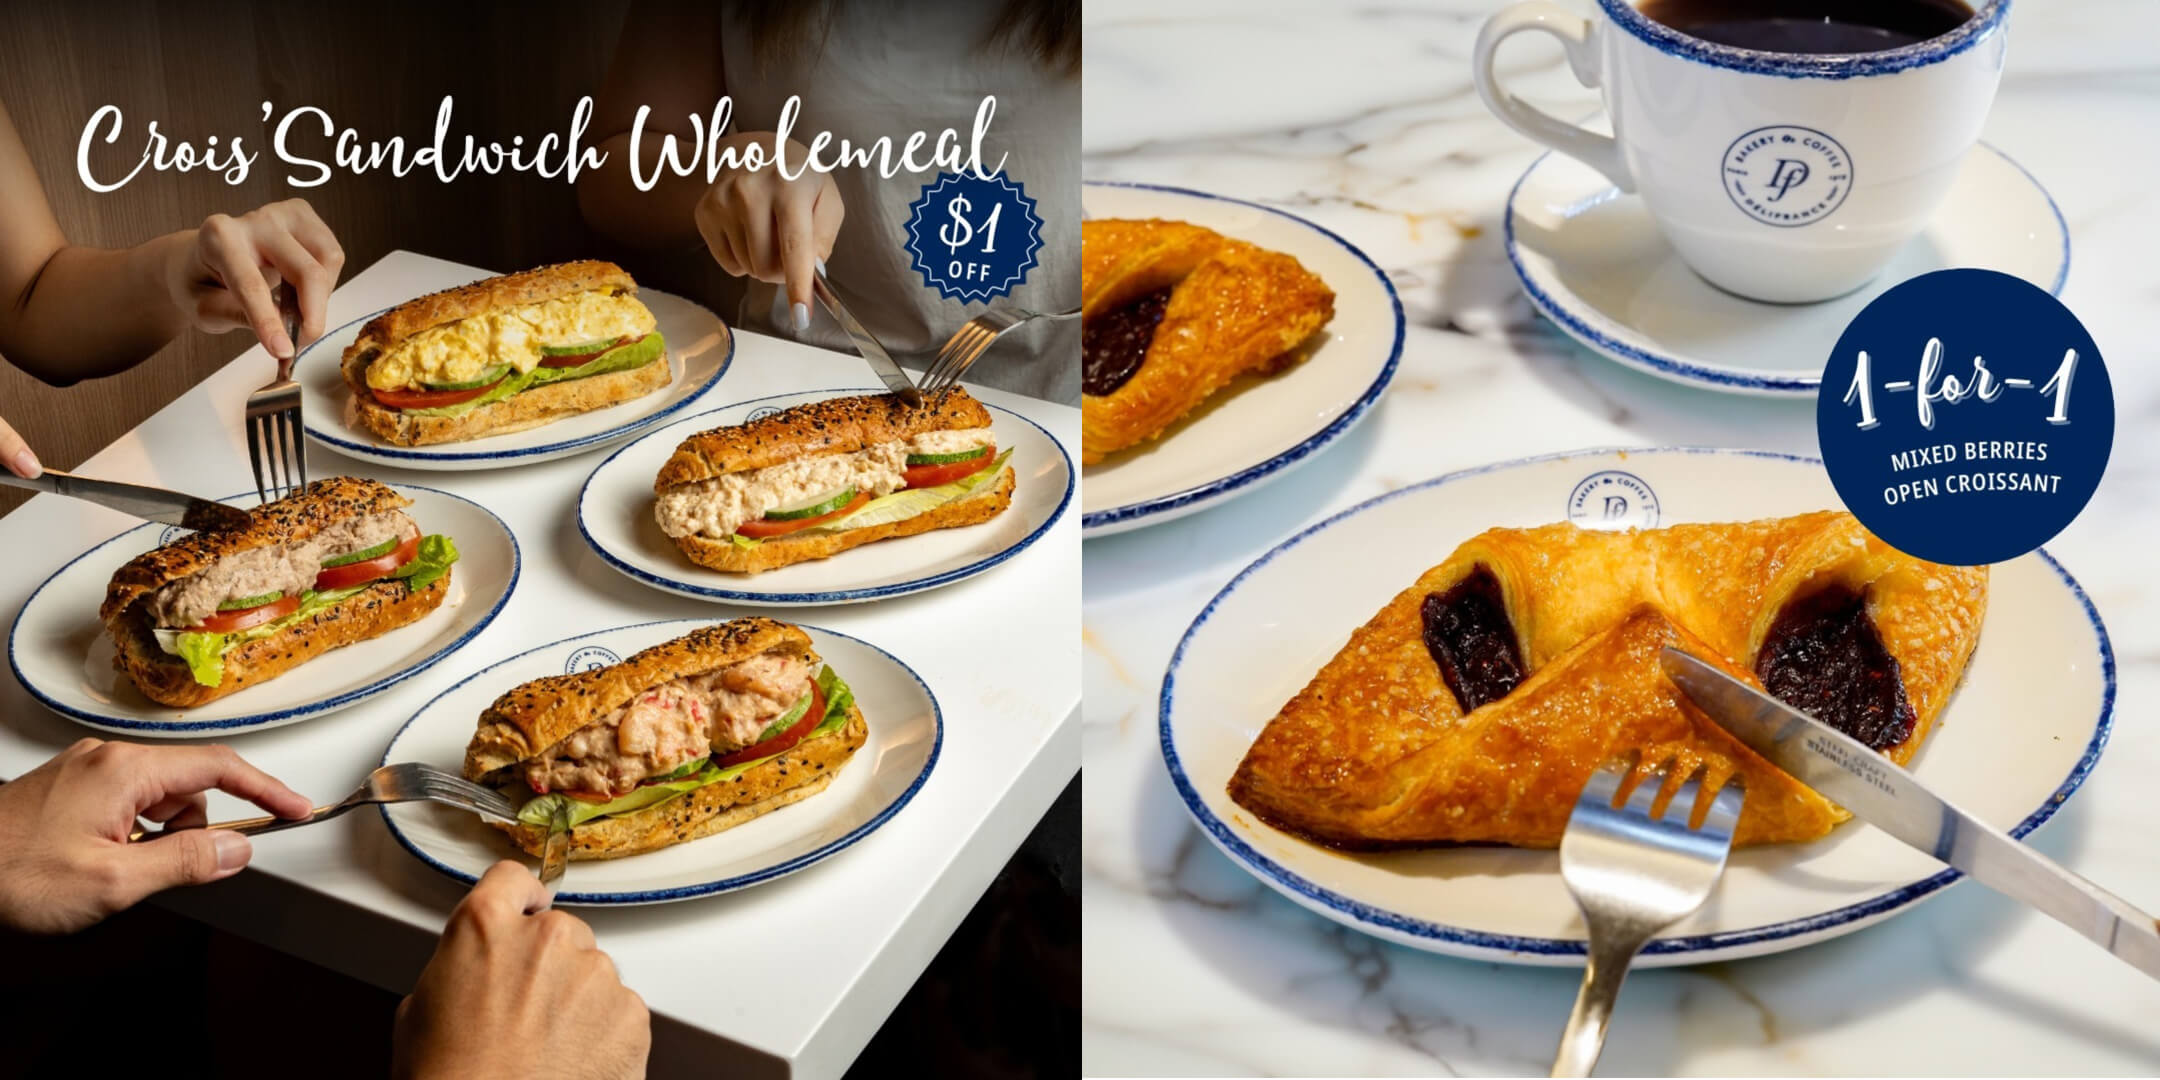 Délifrance,Get $1 off the newly launched Crois Sandwich